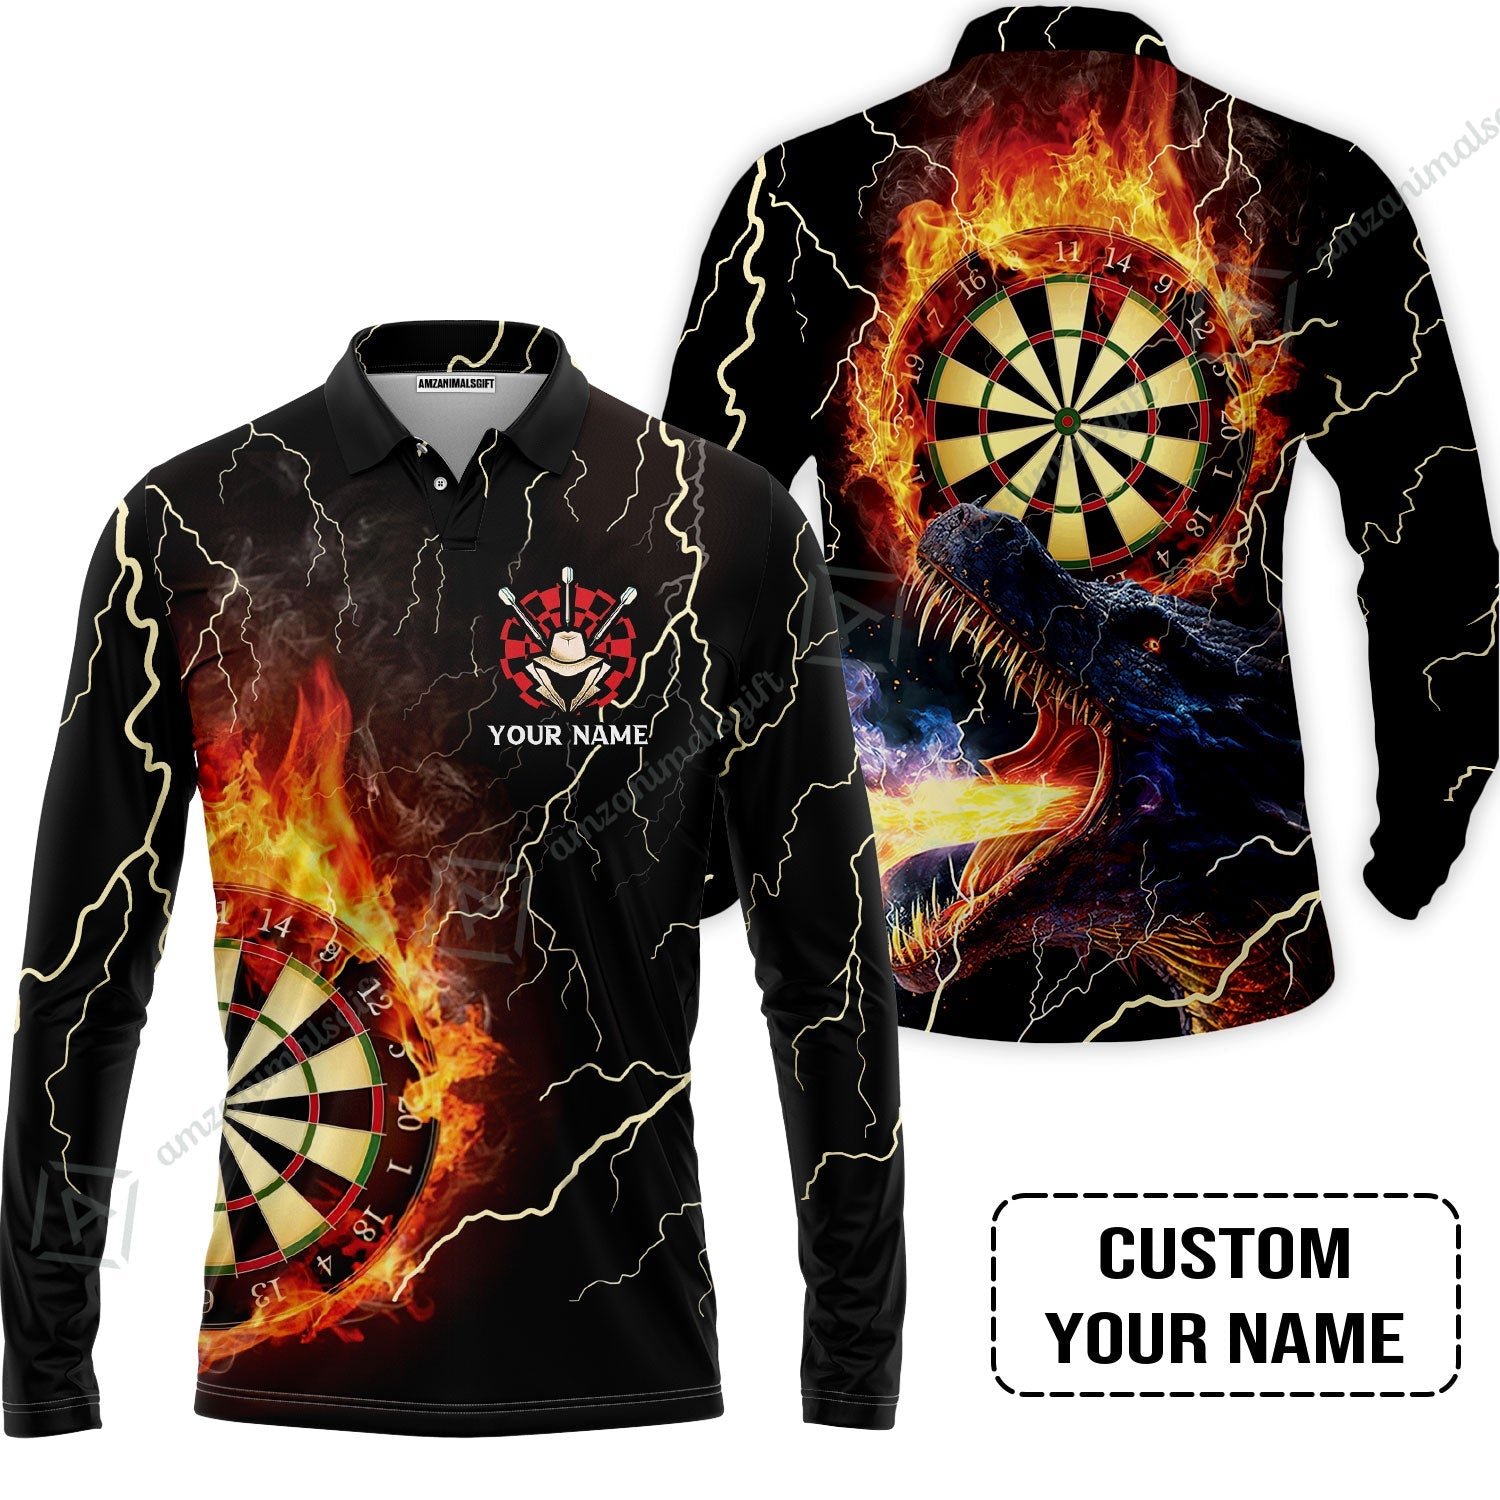 Customized Darts Long Sleeve Men Polo Shirt, Flame Dartboard, Personalized Name Dragon And Darts Polo Shirt - Perfect Gift For Darts Lovers